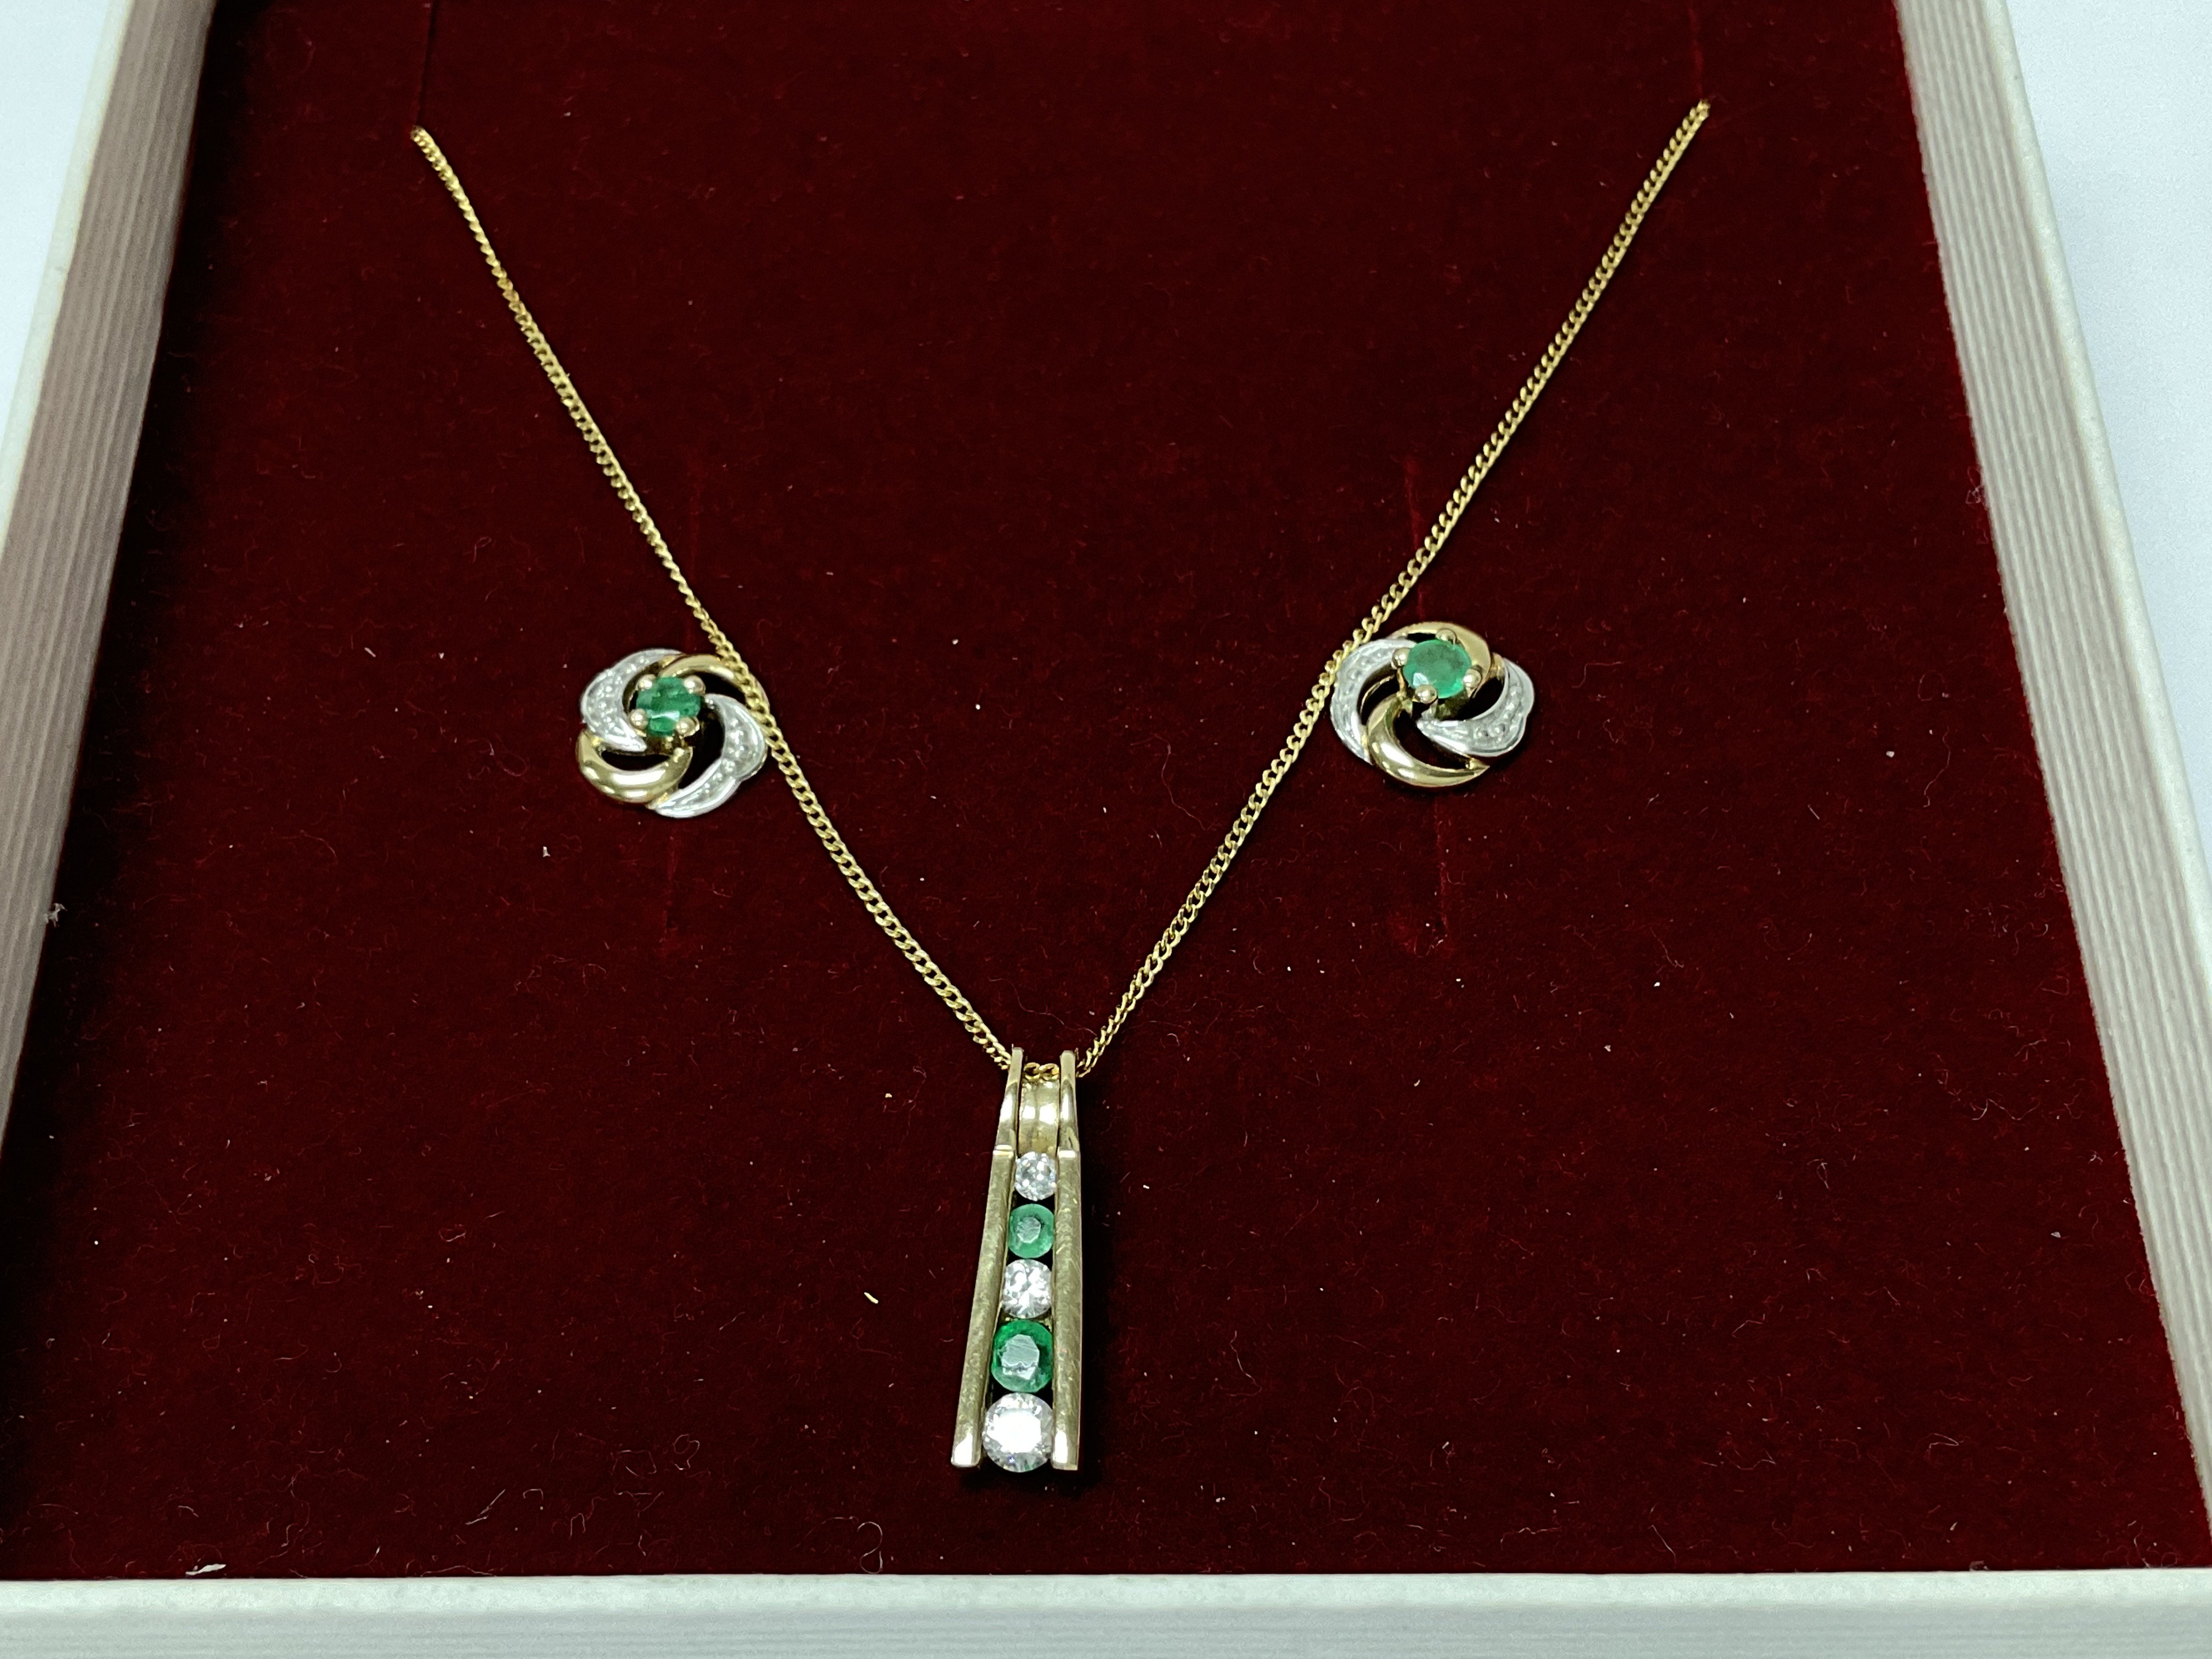 A 9ct gold pendant, chain and earrings set with em